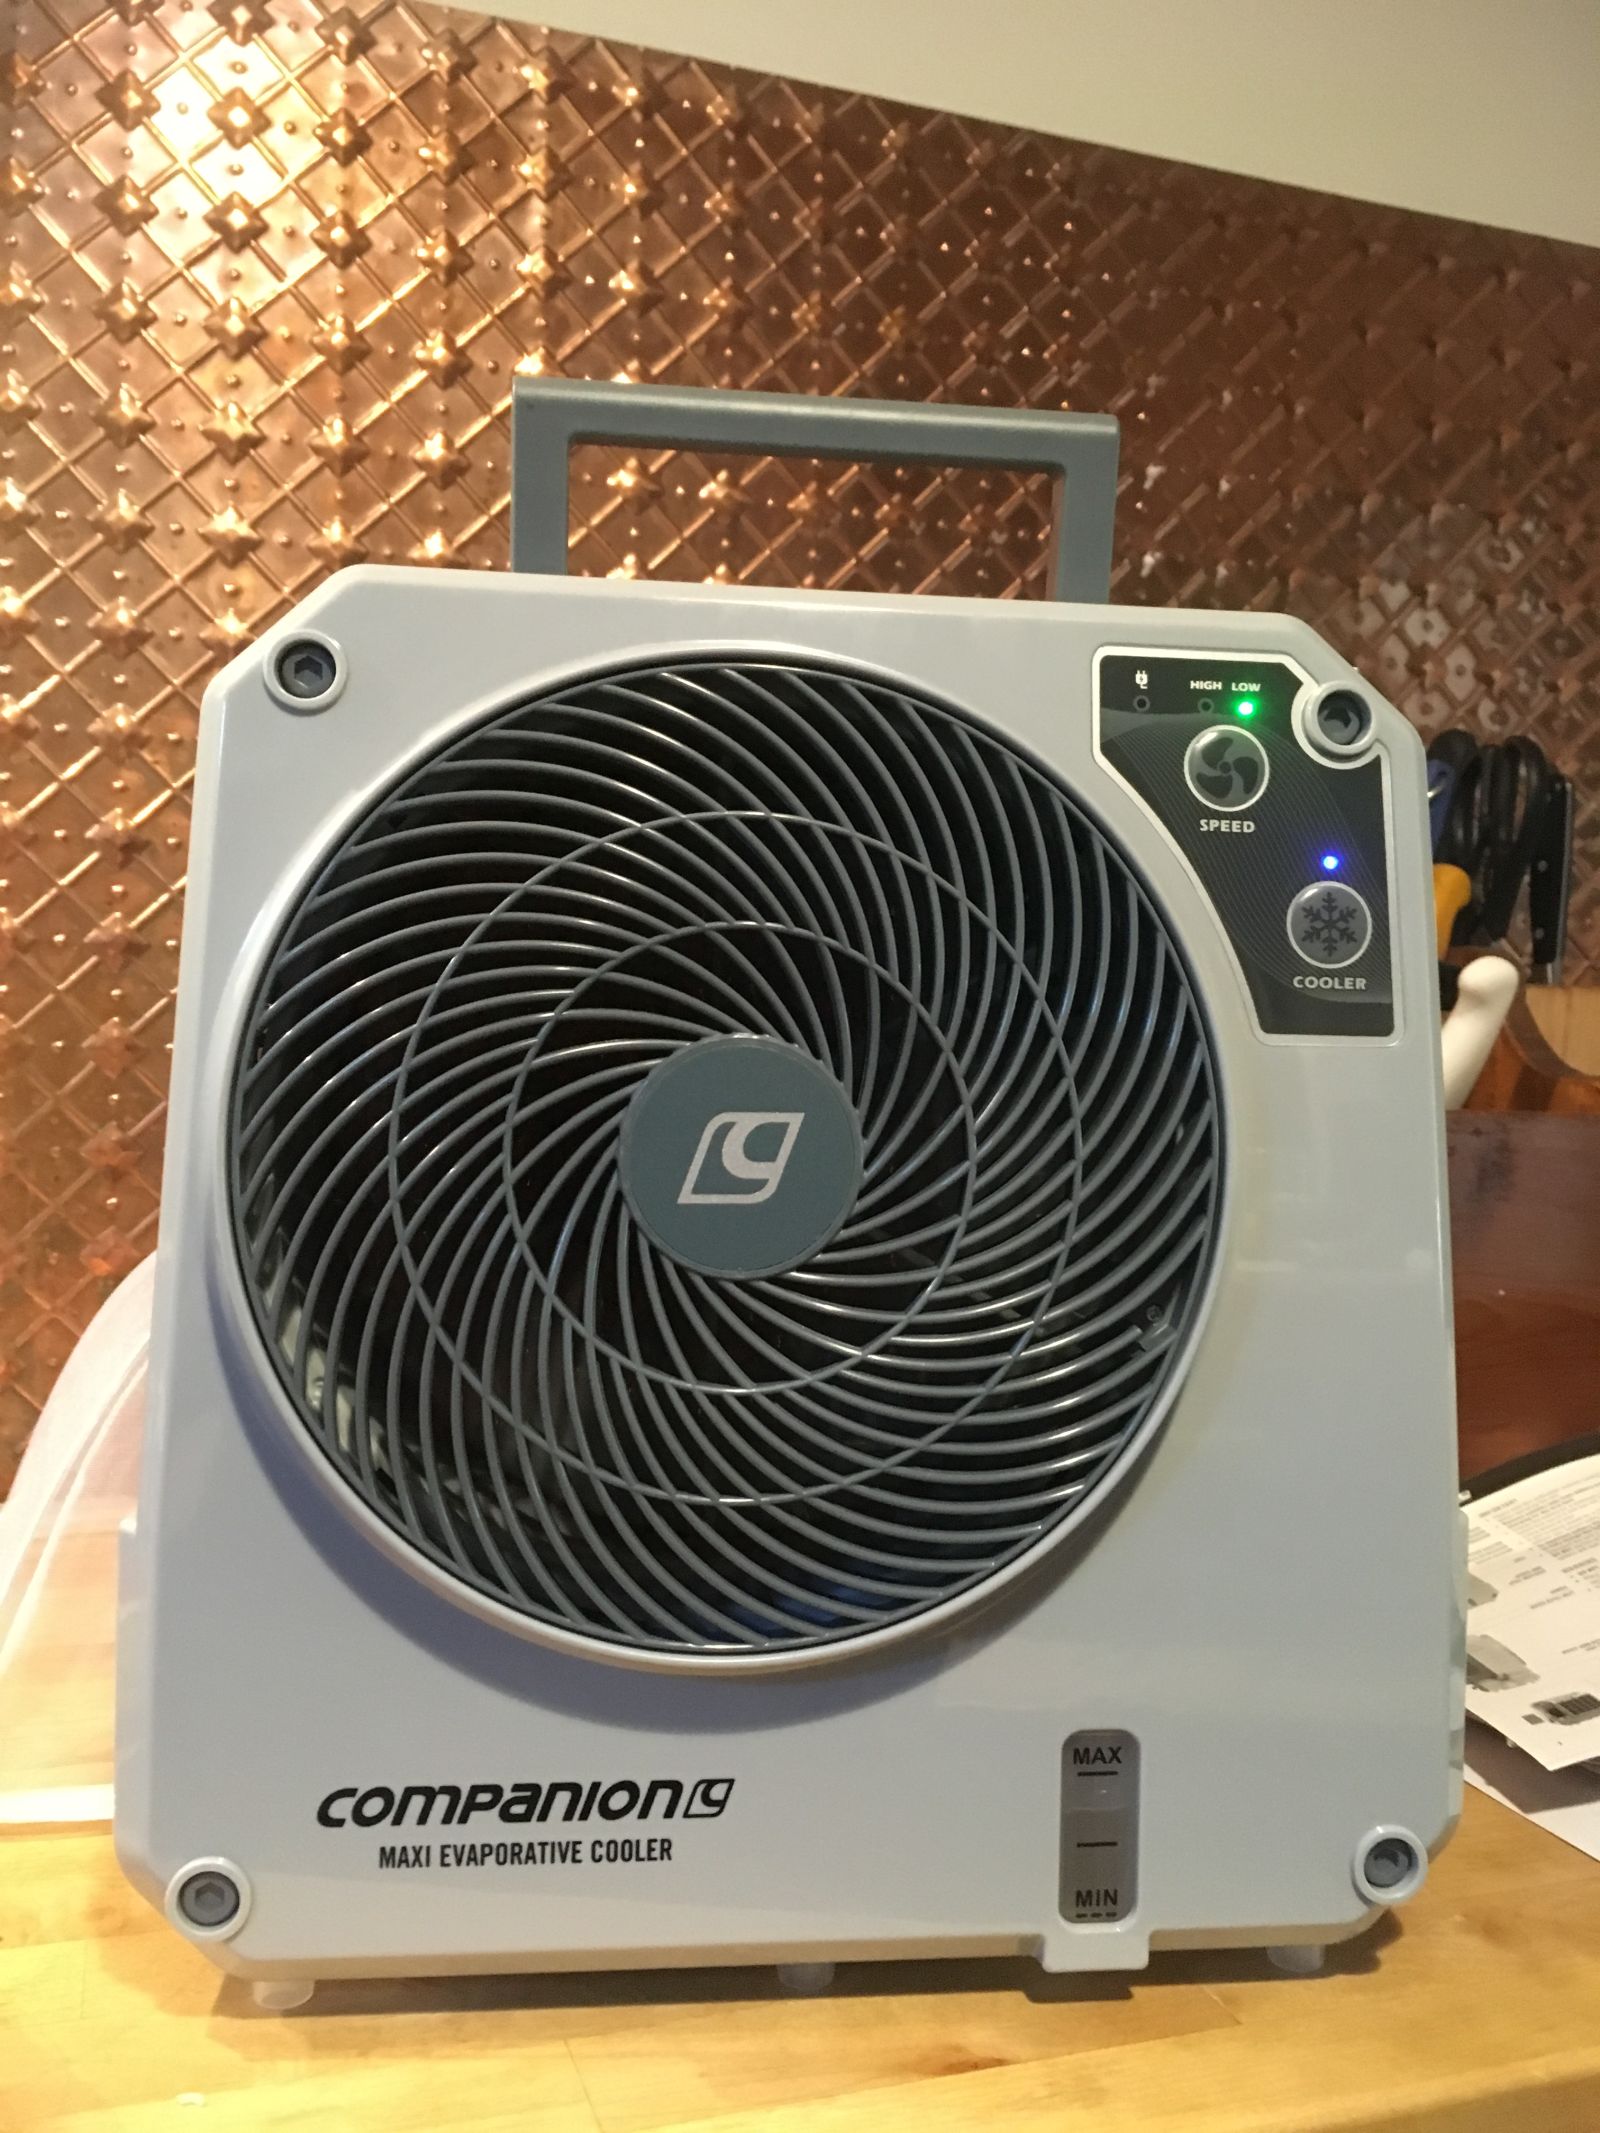 Runs from mains power, 12v, or it’s own battery for about 3 hours. Works as a fan or an evaporative air conditioner. Yes I am getting soft.